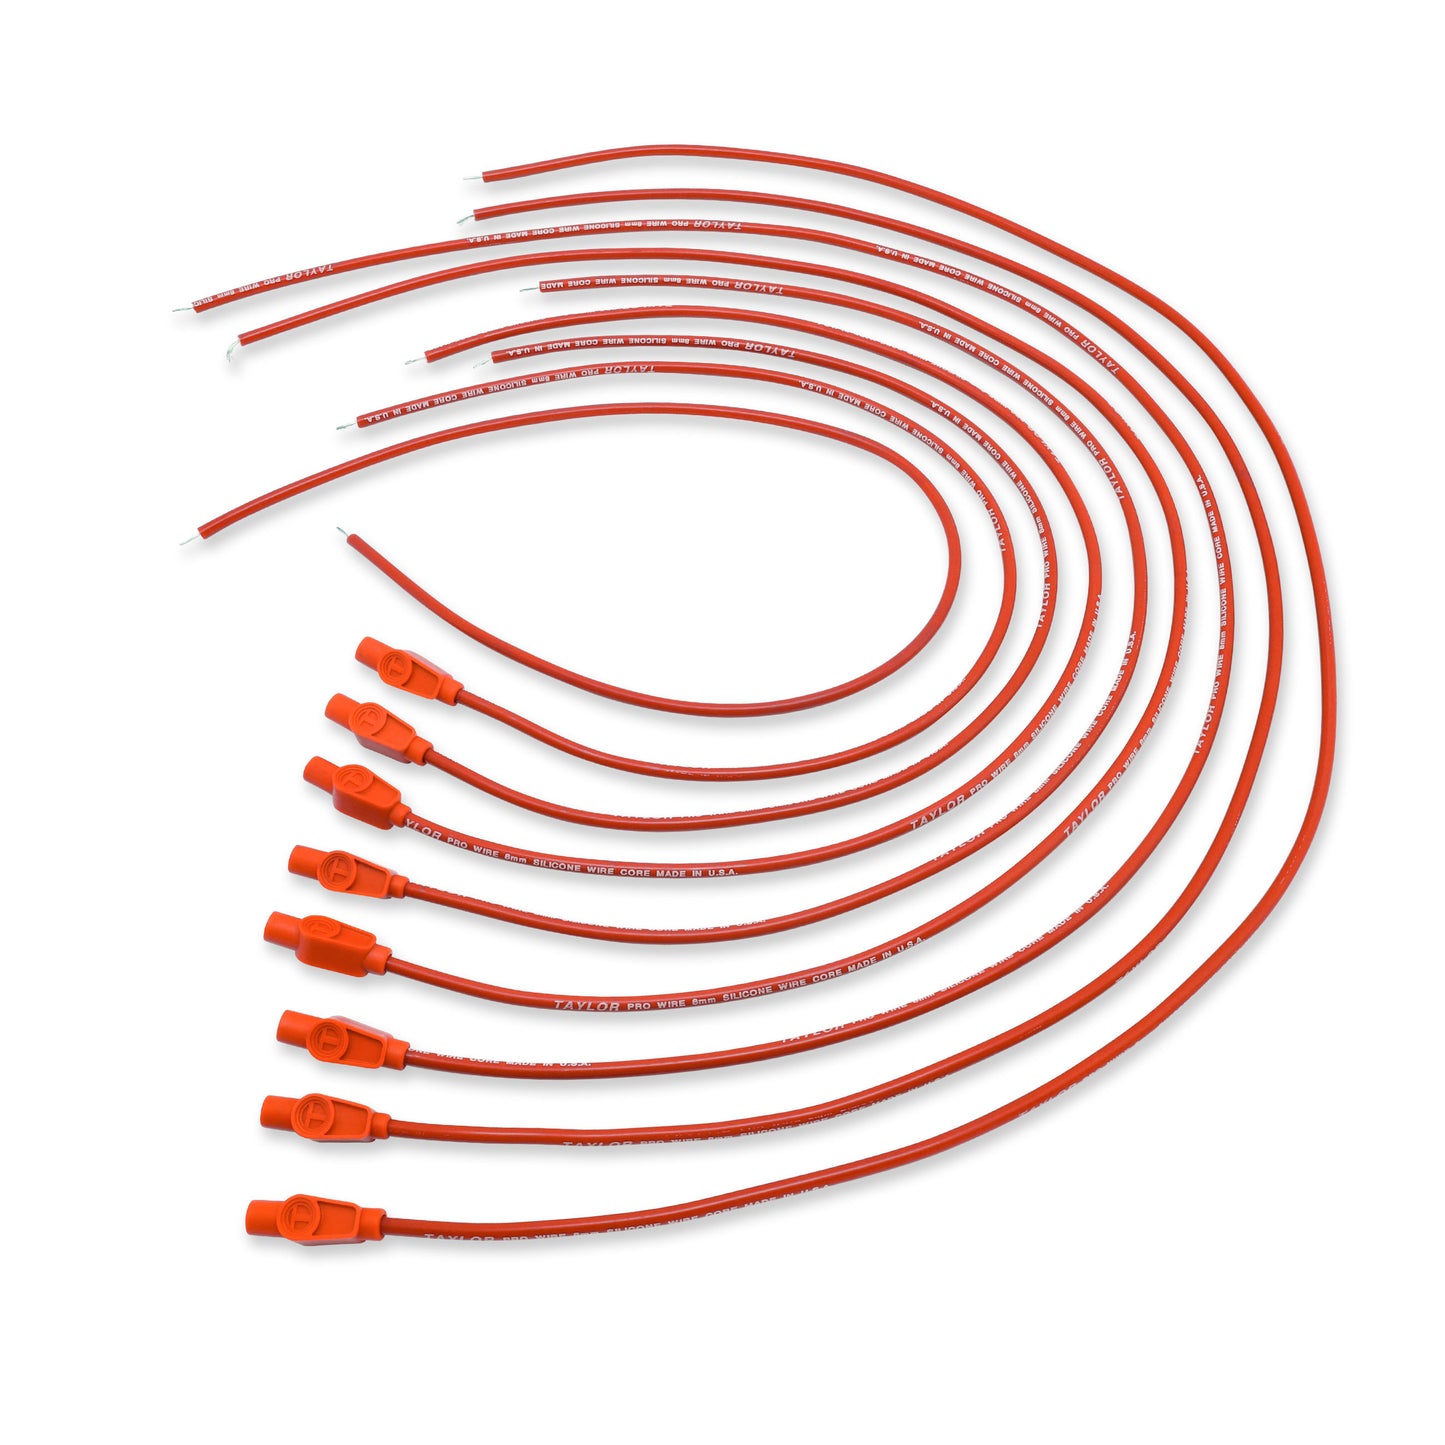 Taylor Cable 70254 8mm Pro TCW Ignition Wires univ 8 cyl 180 red